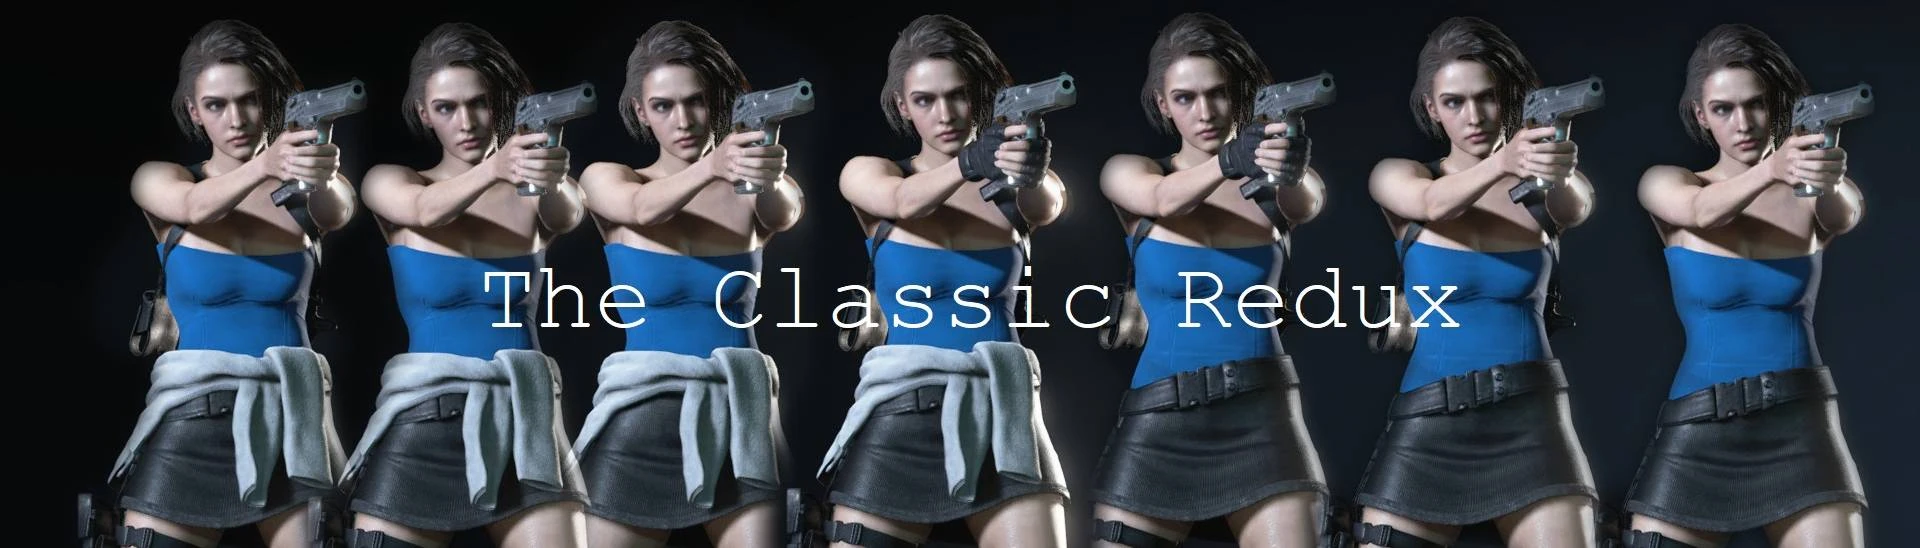 Steam Workshop::Resident Evil 3 Remake - Jill Valentine Classic Outfit